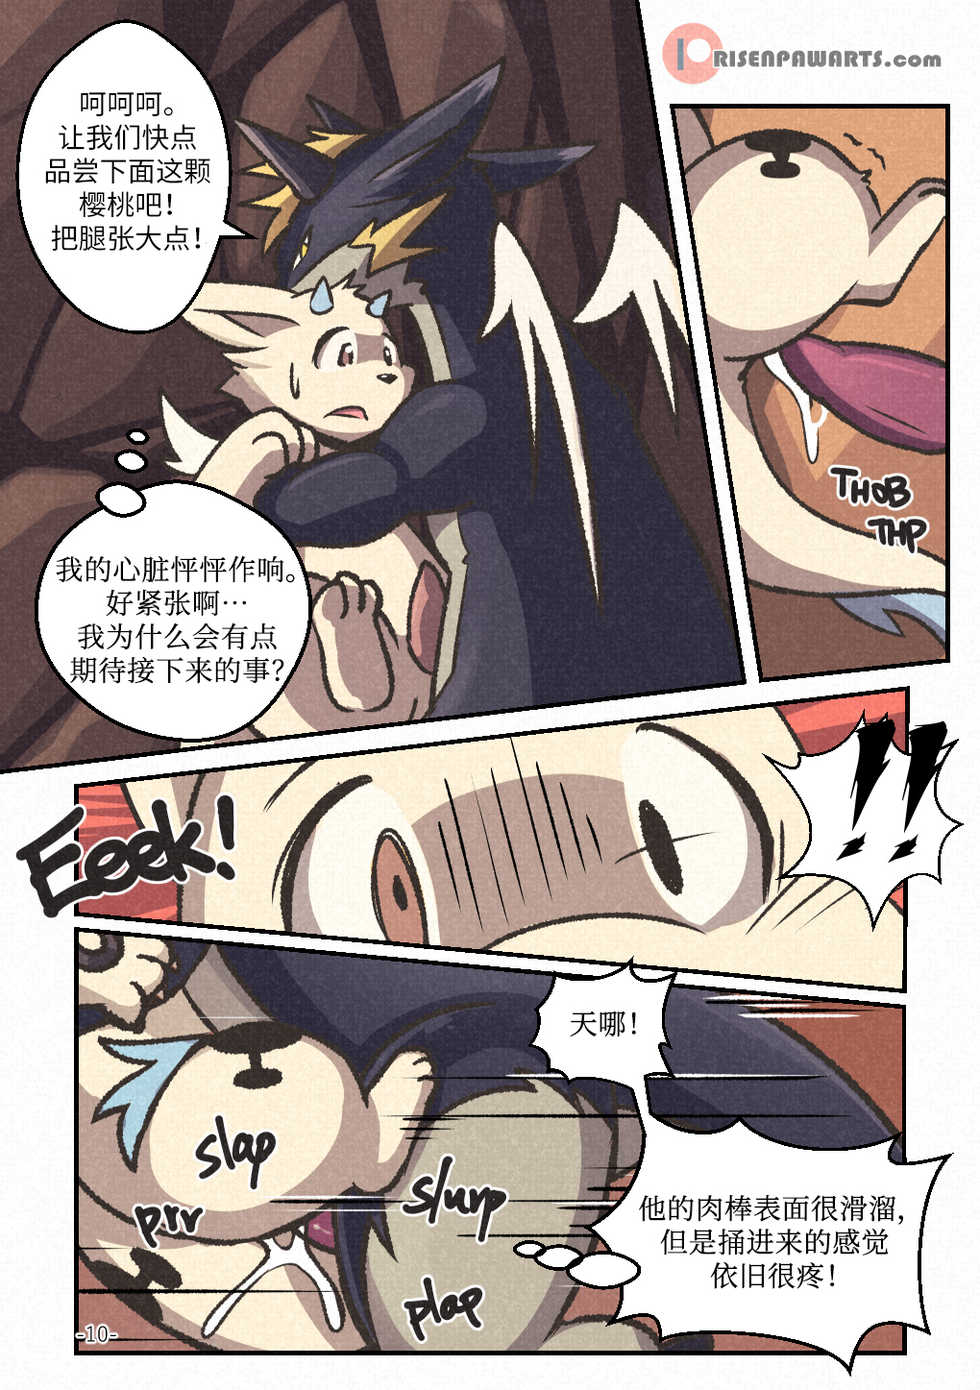 [Risenpaw] Out of Control [Chinese] [悬赏大厅×不可视汉化组] - Page 9